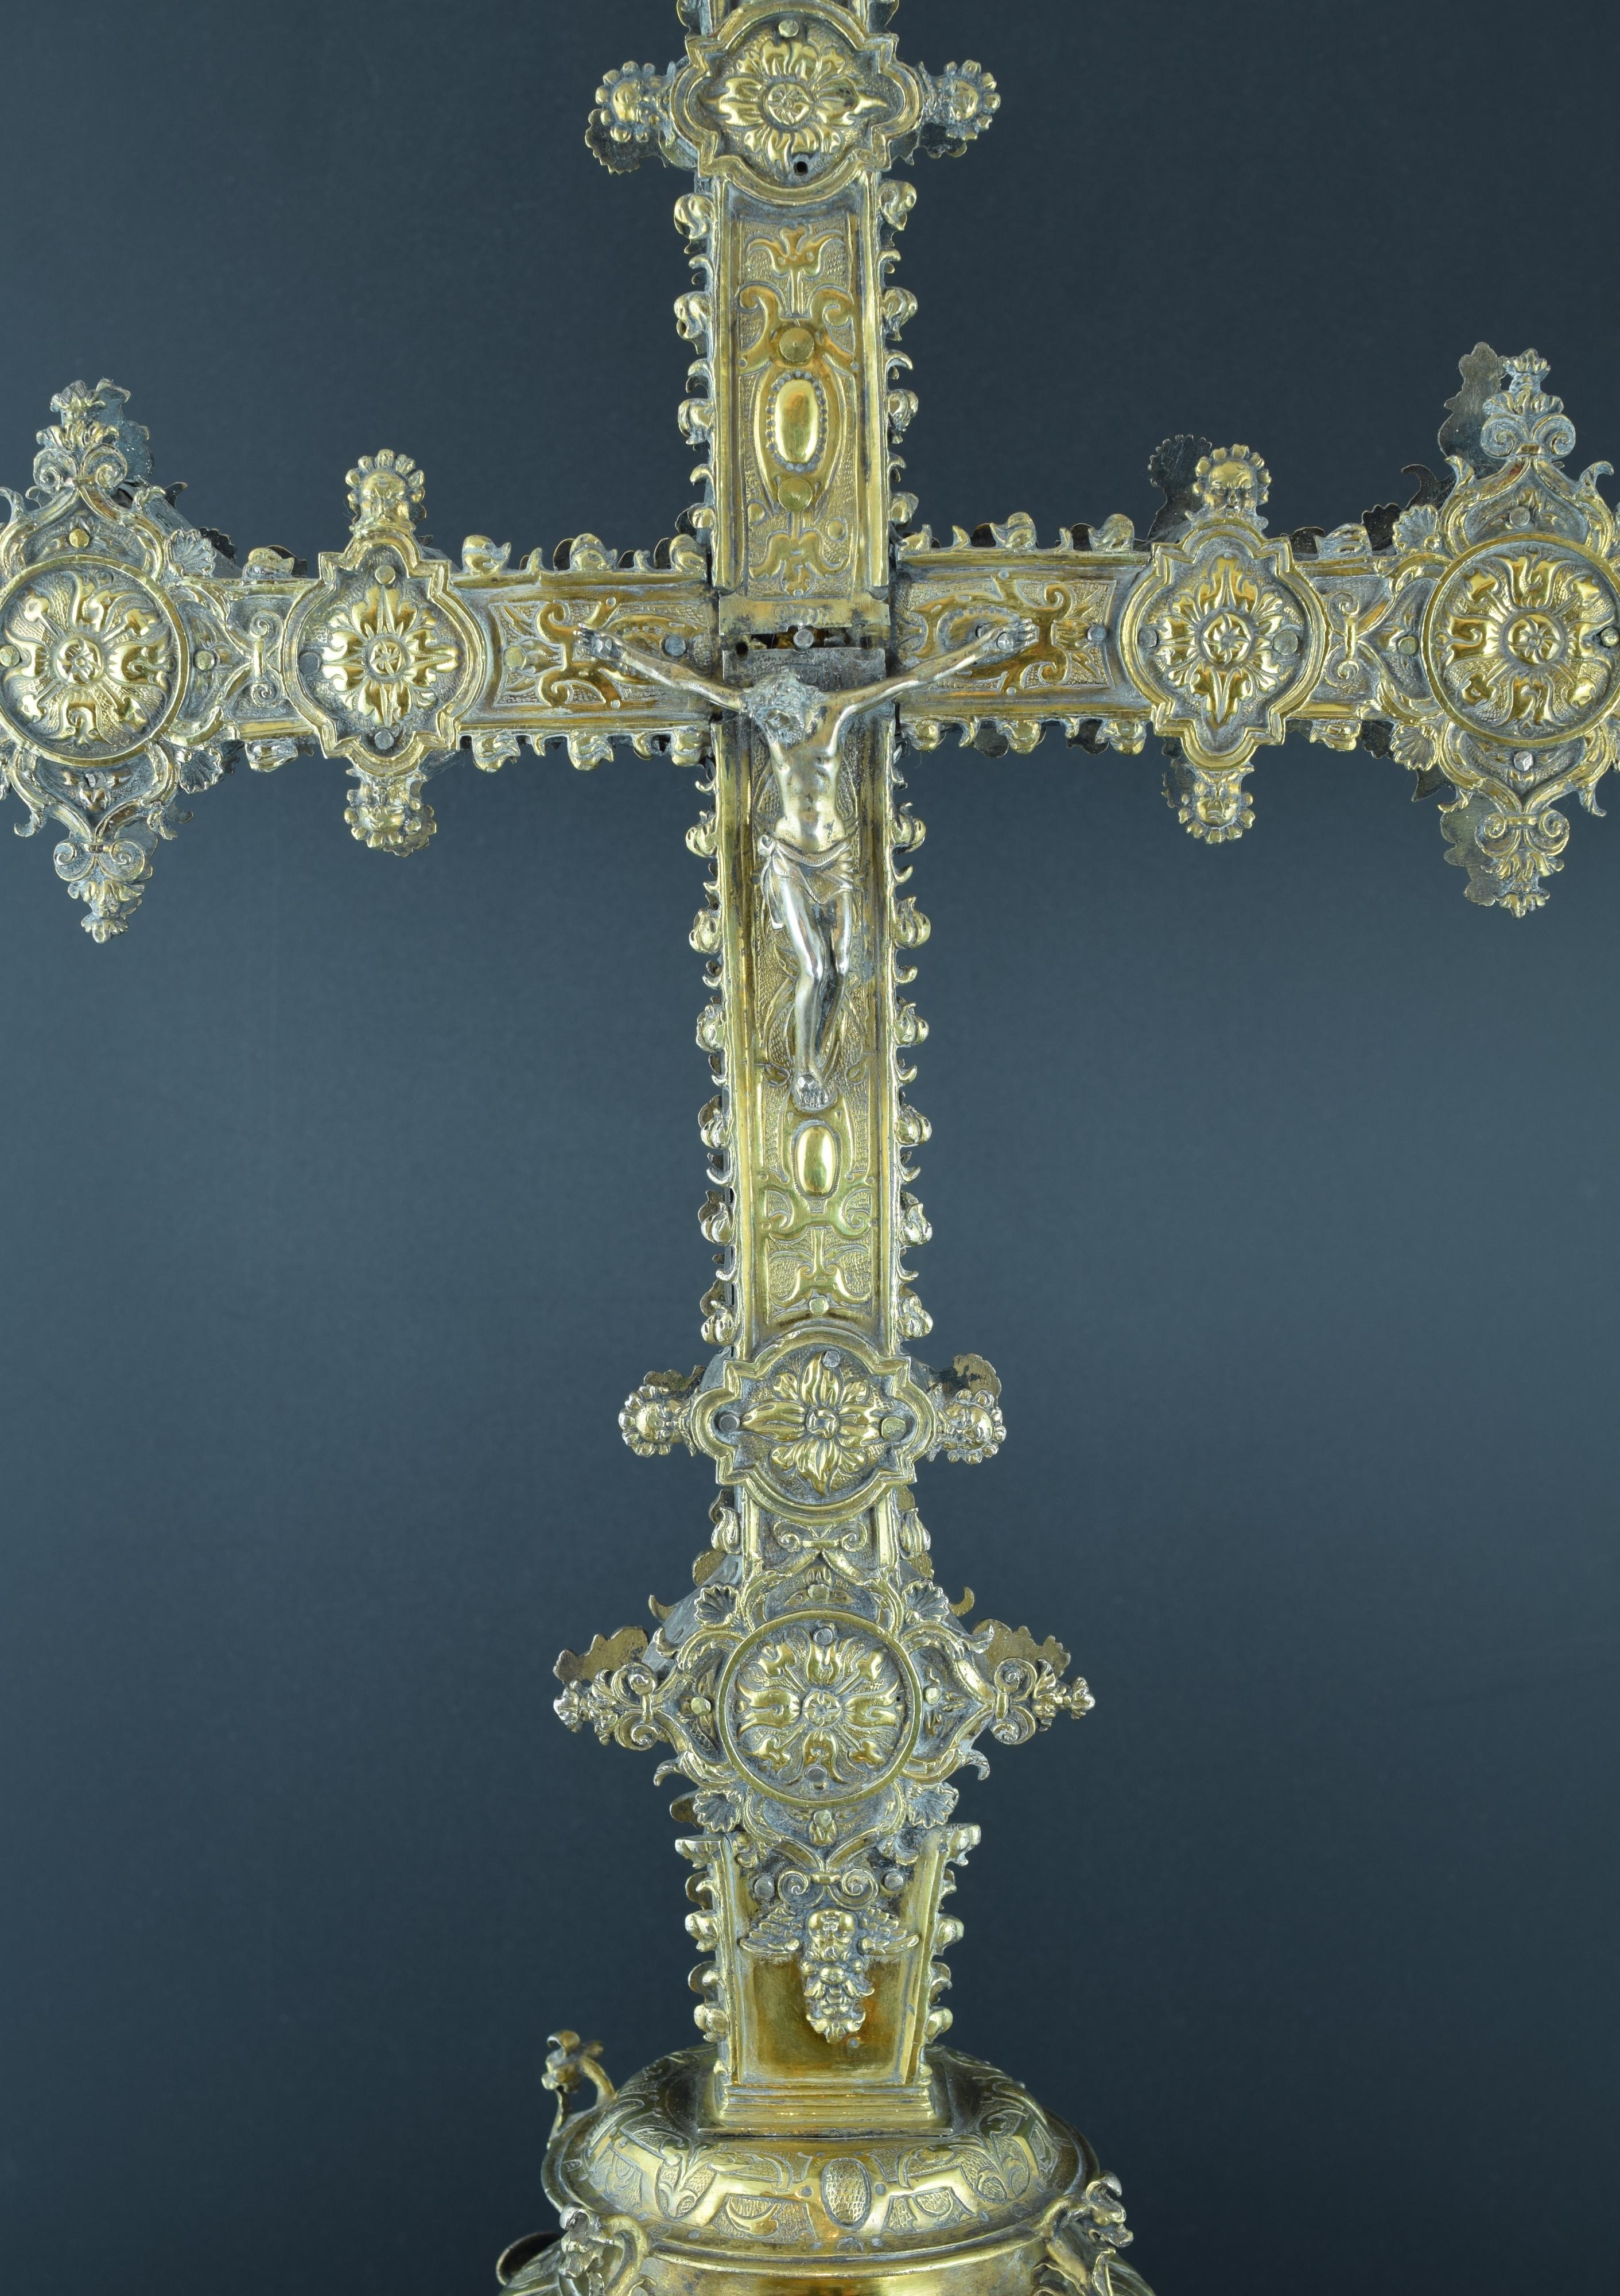 processional cross meaning